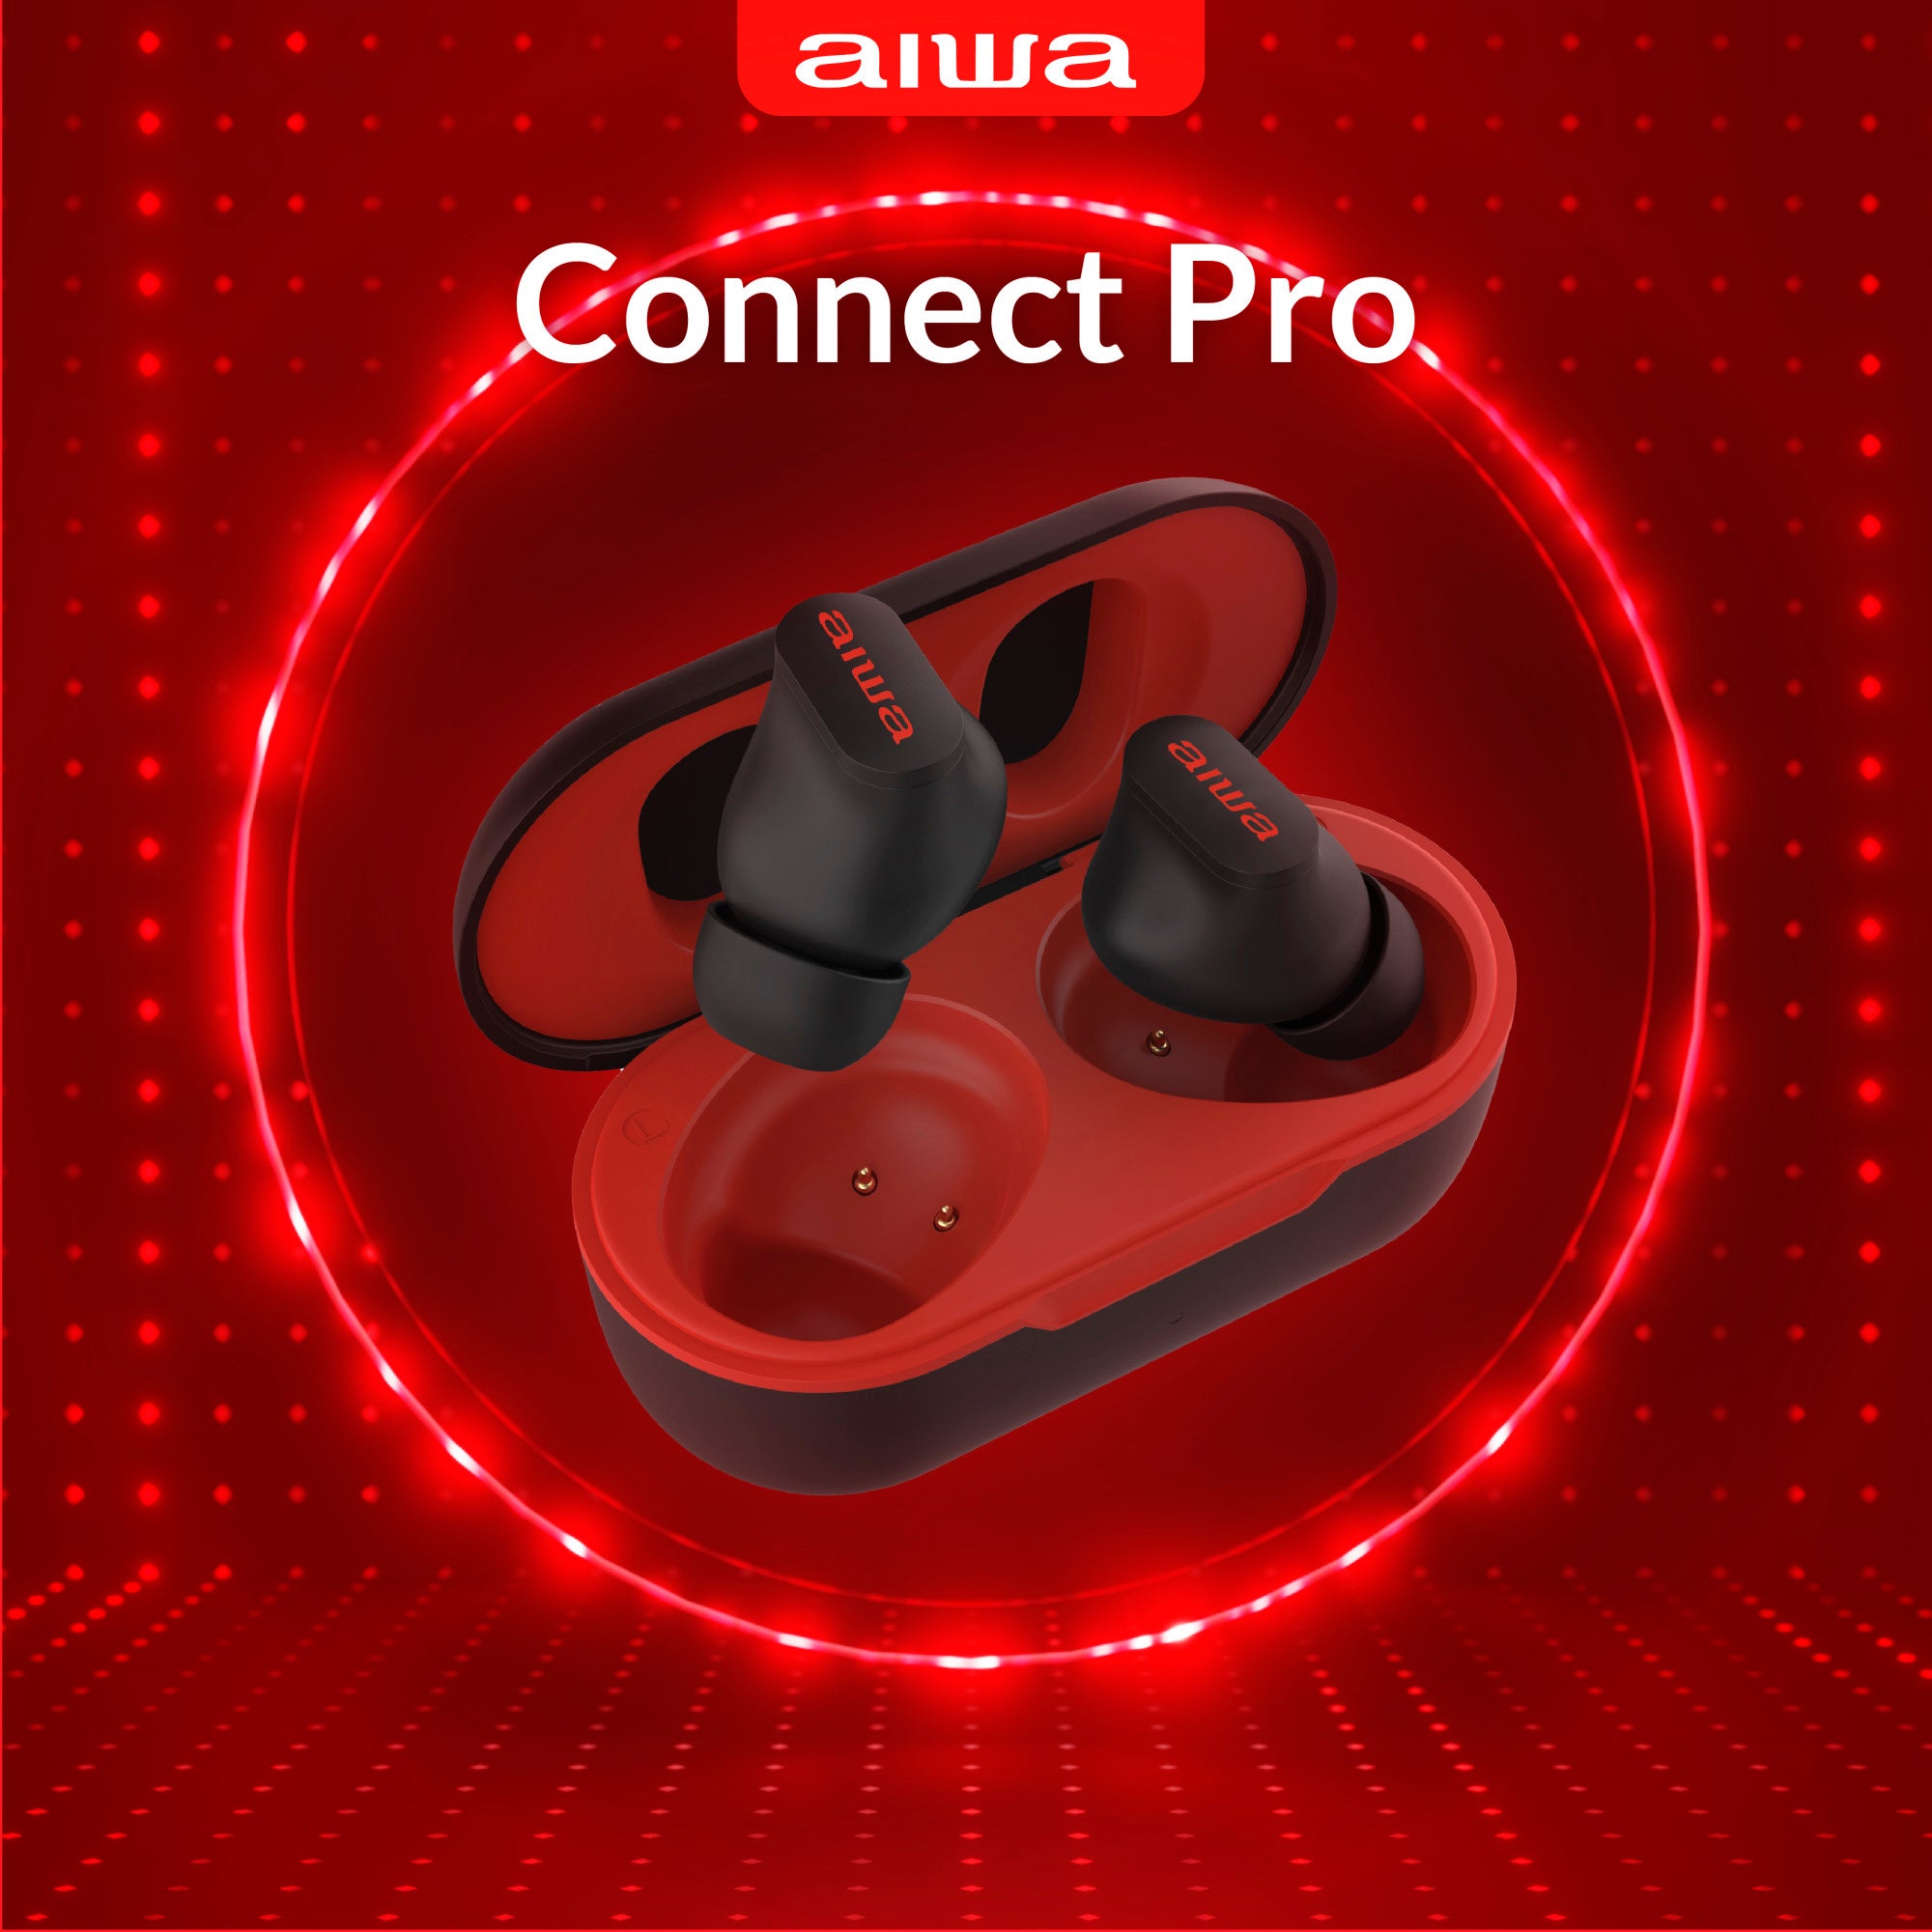 Connect Pro Wireless Earbuds True Wireless Stereo Headphones with Wireless Charging Case, IPX4 Waterproof